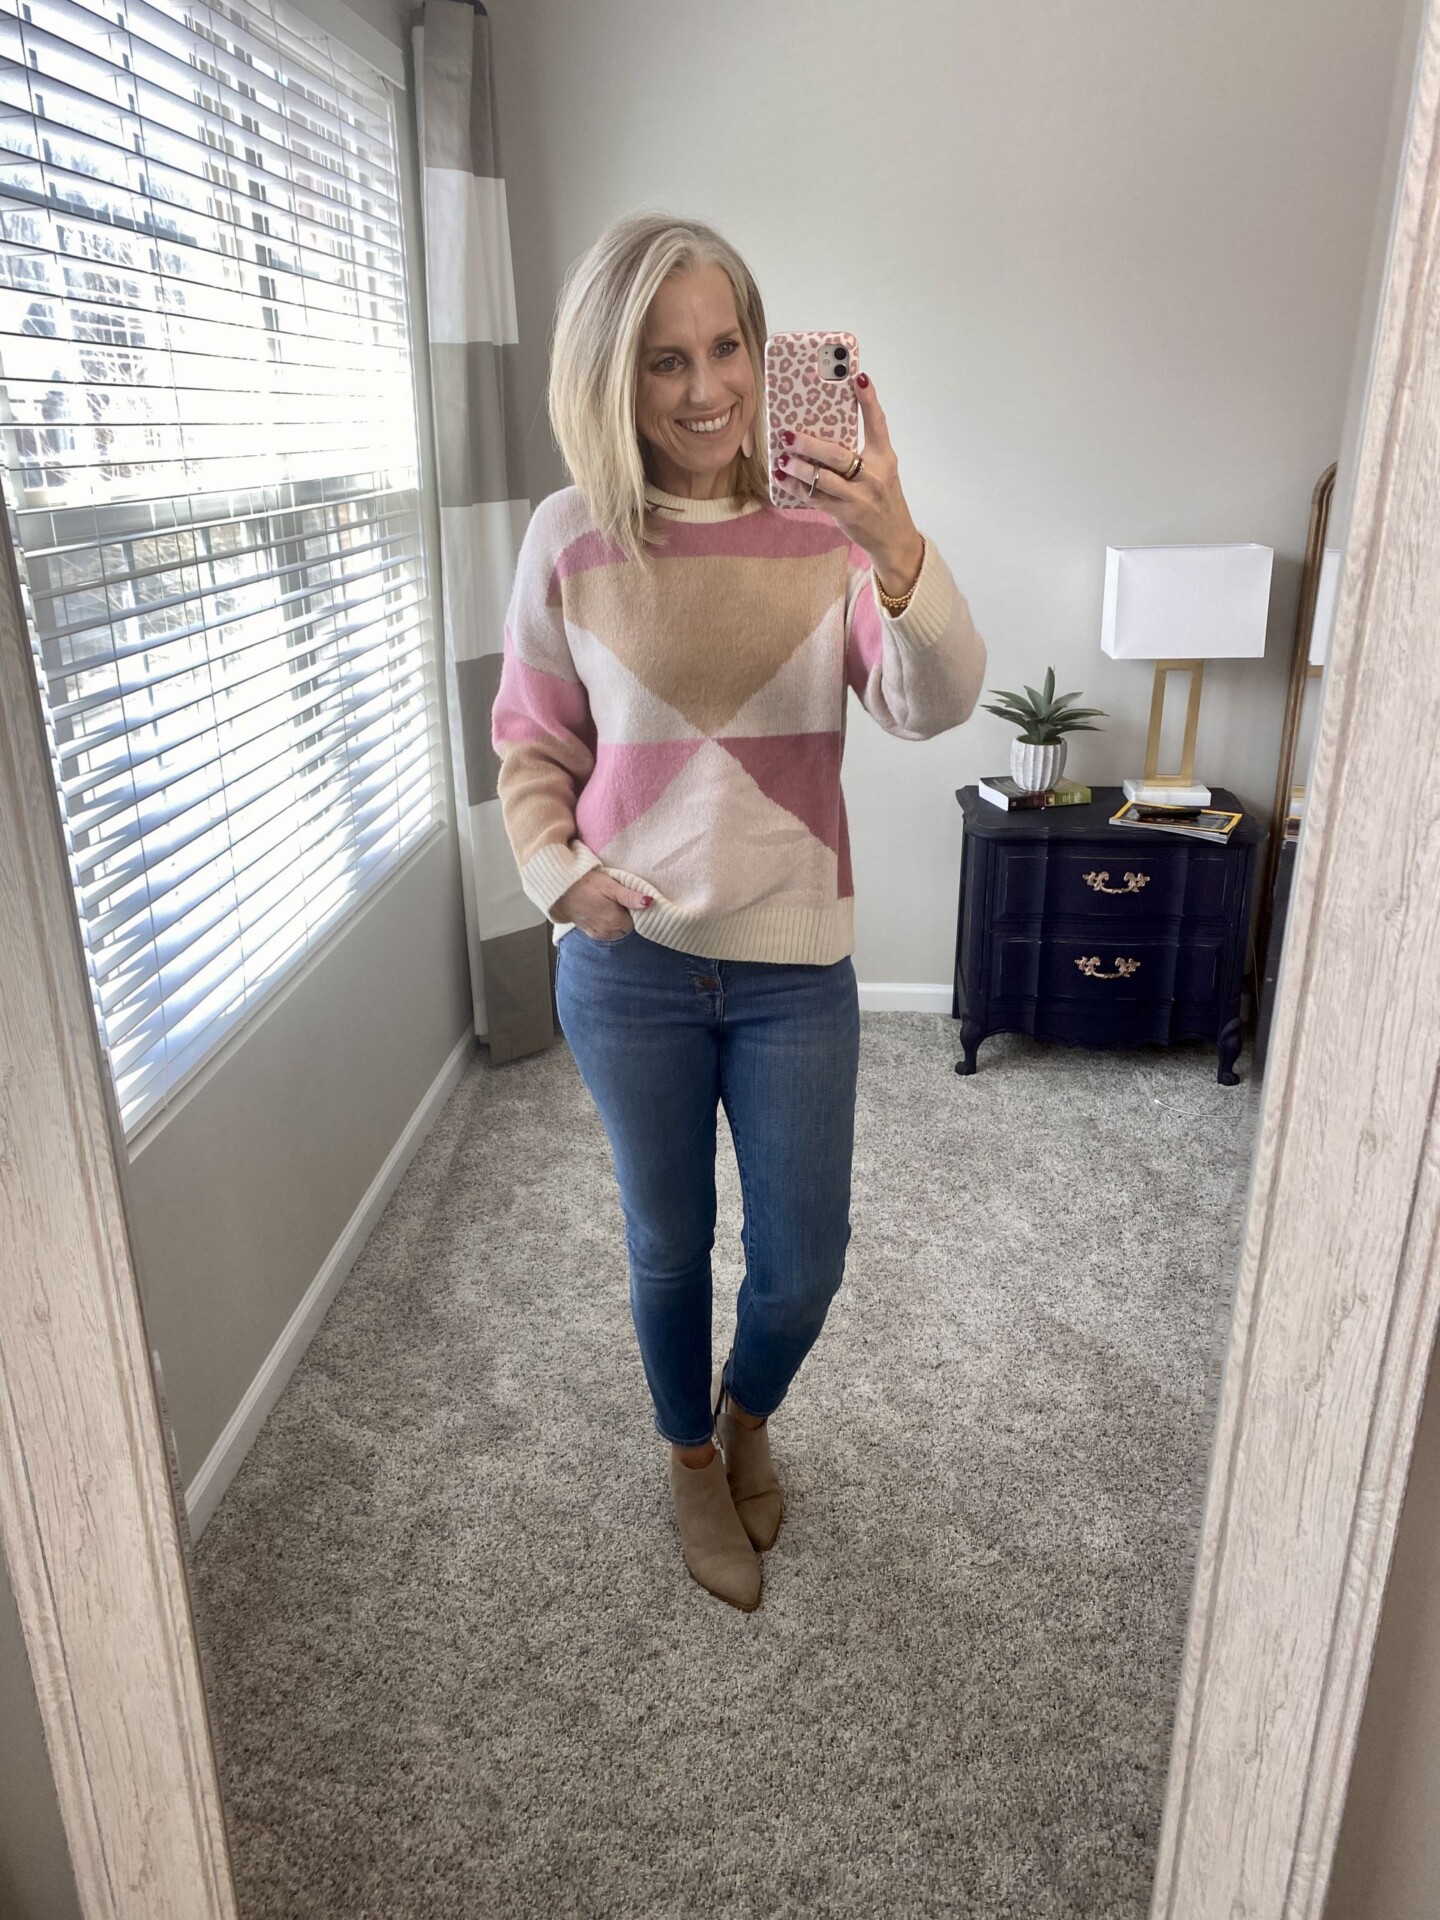 Avara sweater and neutral booties